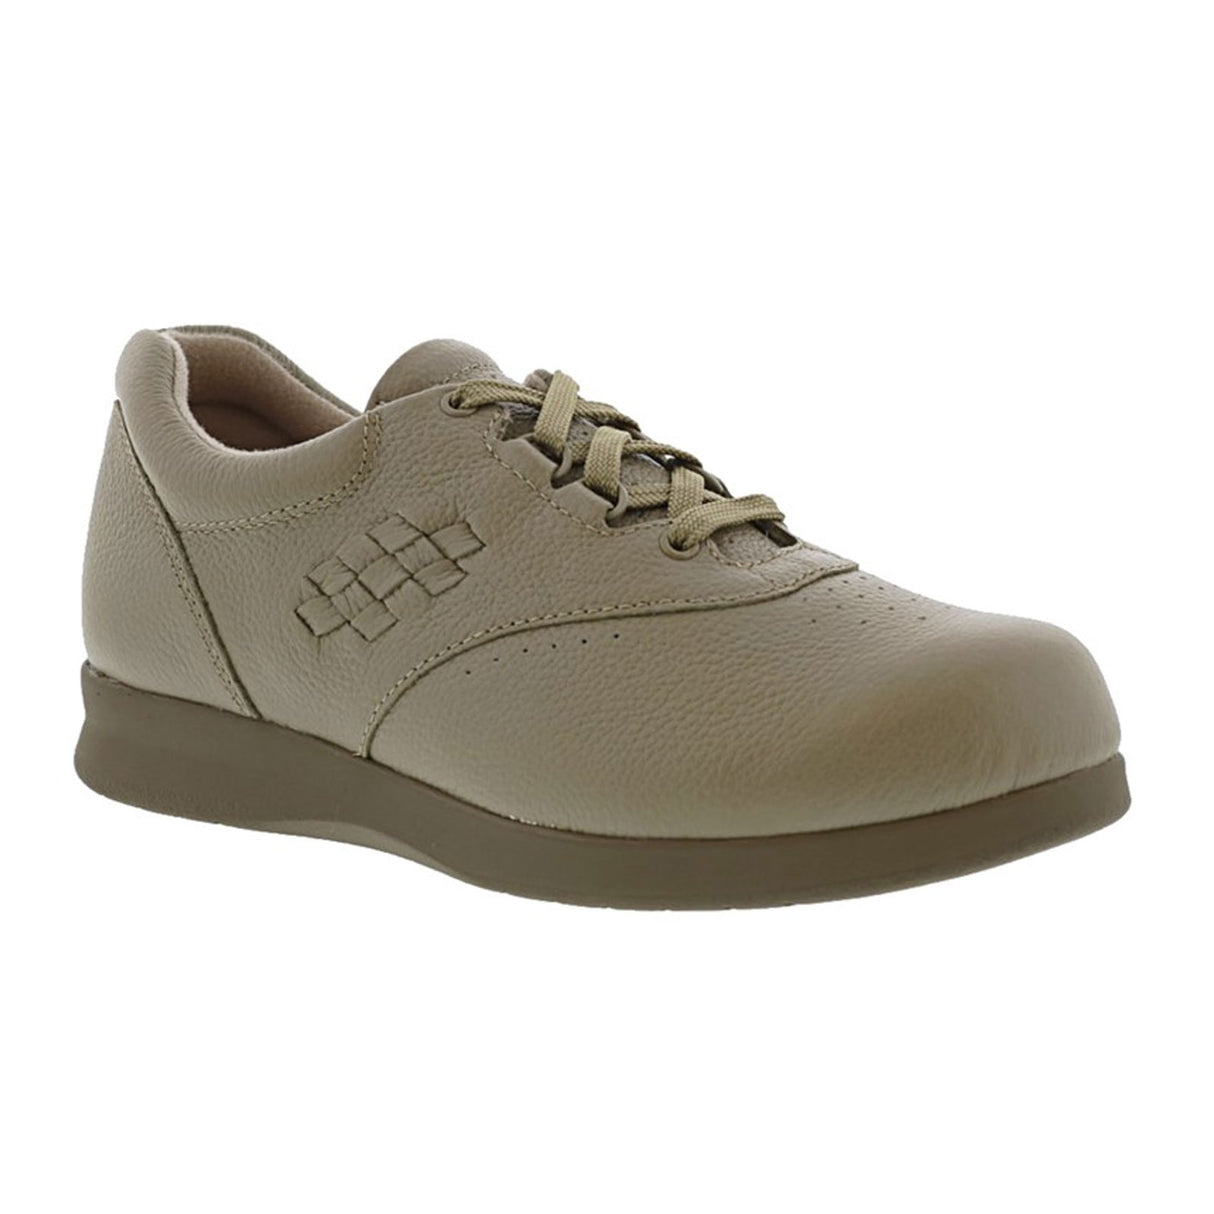 Drew Parade II Orthopedic Lace Up (Women) - Taupe Leather Dress-Casual - Lace Ups - The Heel Shoe Fitters